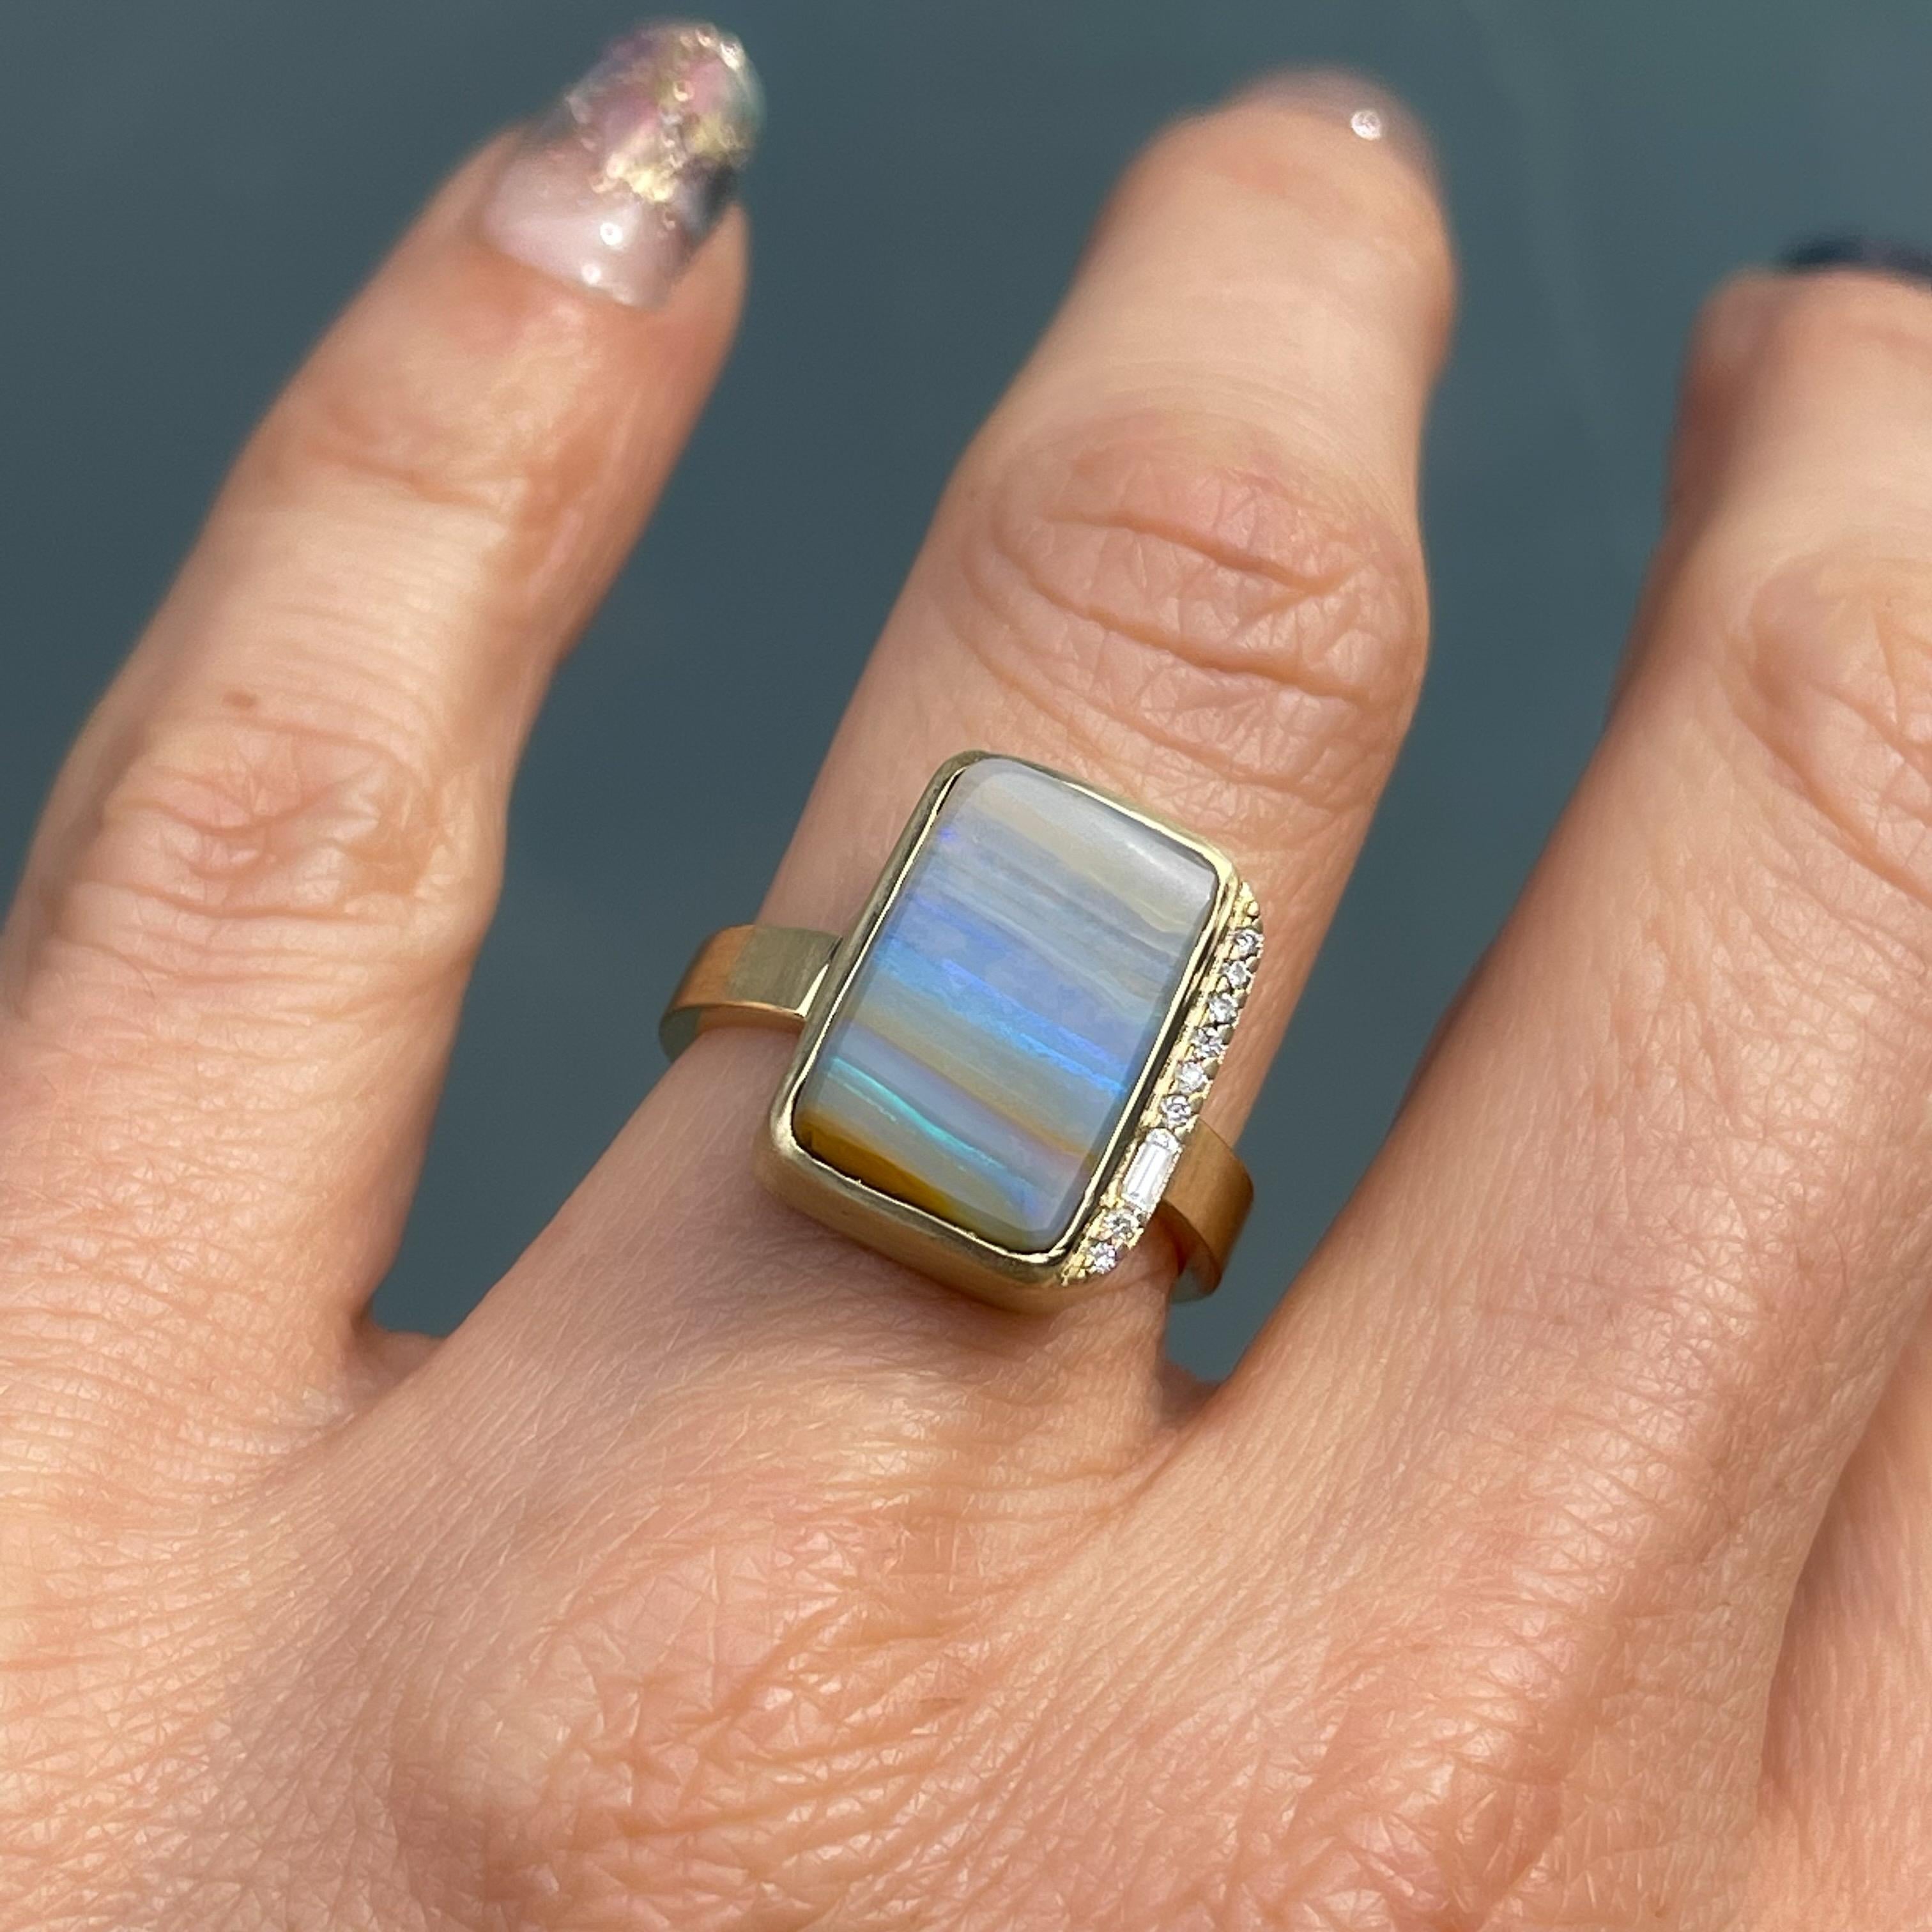 Contemporary Chantilly Skies Australian Opal Ring with Diamonds in 14k Gold by NIXIN Jewelry For Sale